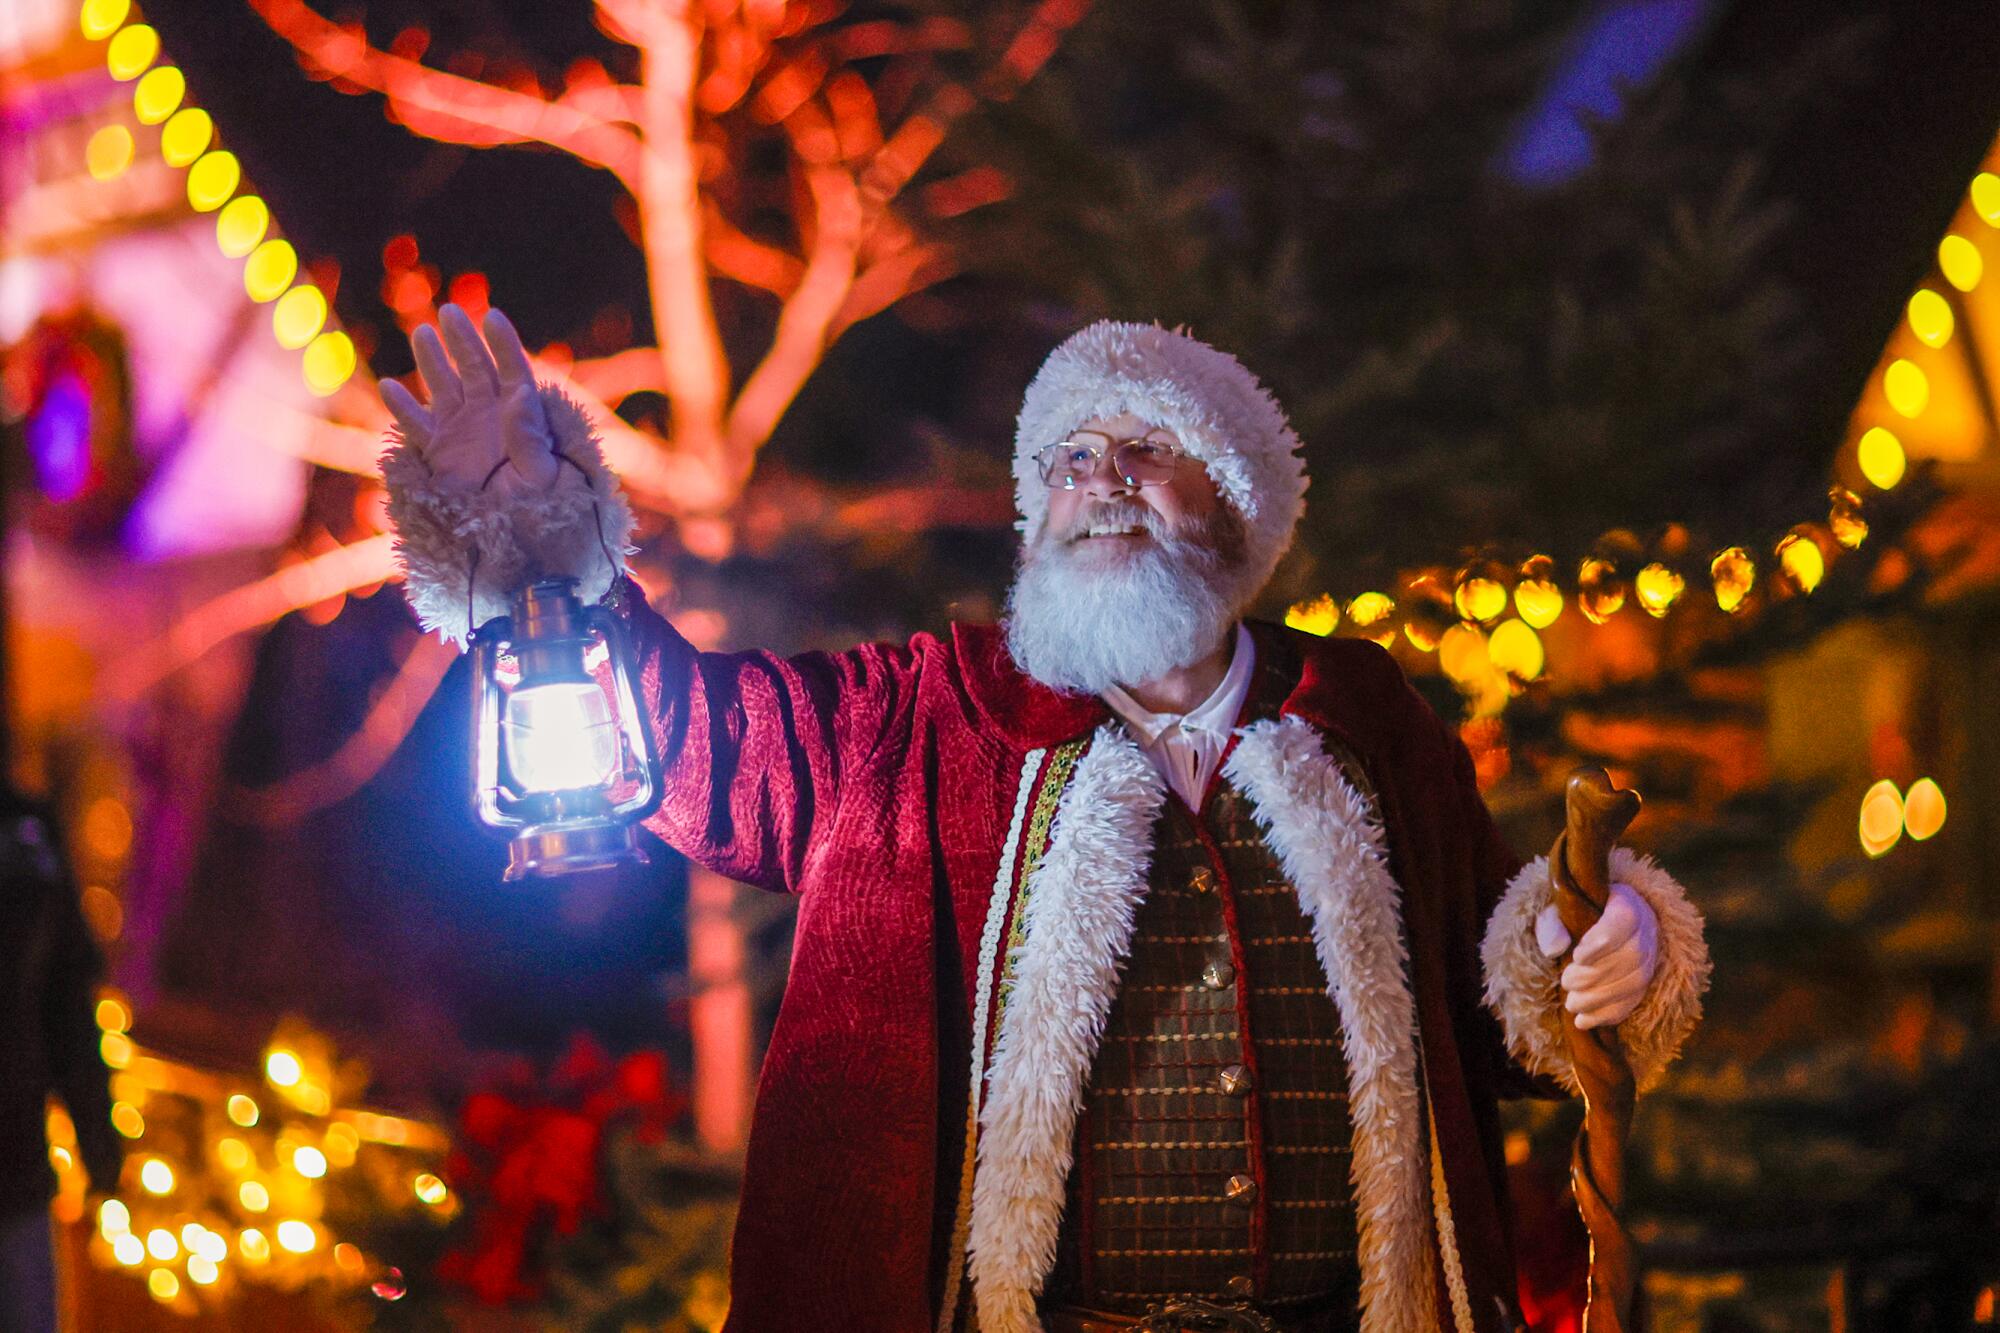 Santa Claus makes his way through Santa's Village by the light of a lantern to oversee a Christmas tree lighting ceremony.